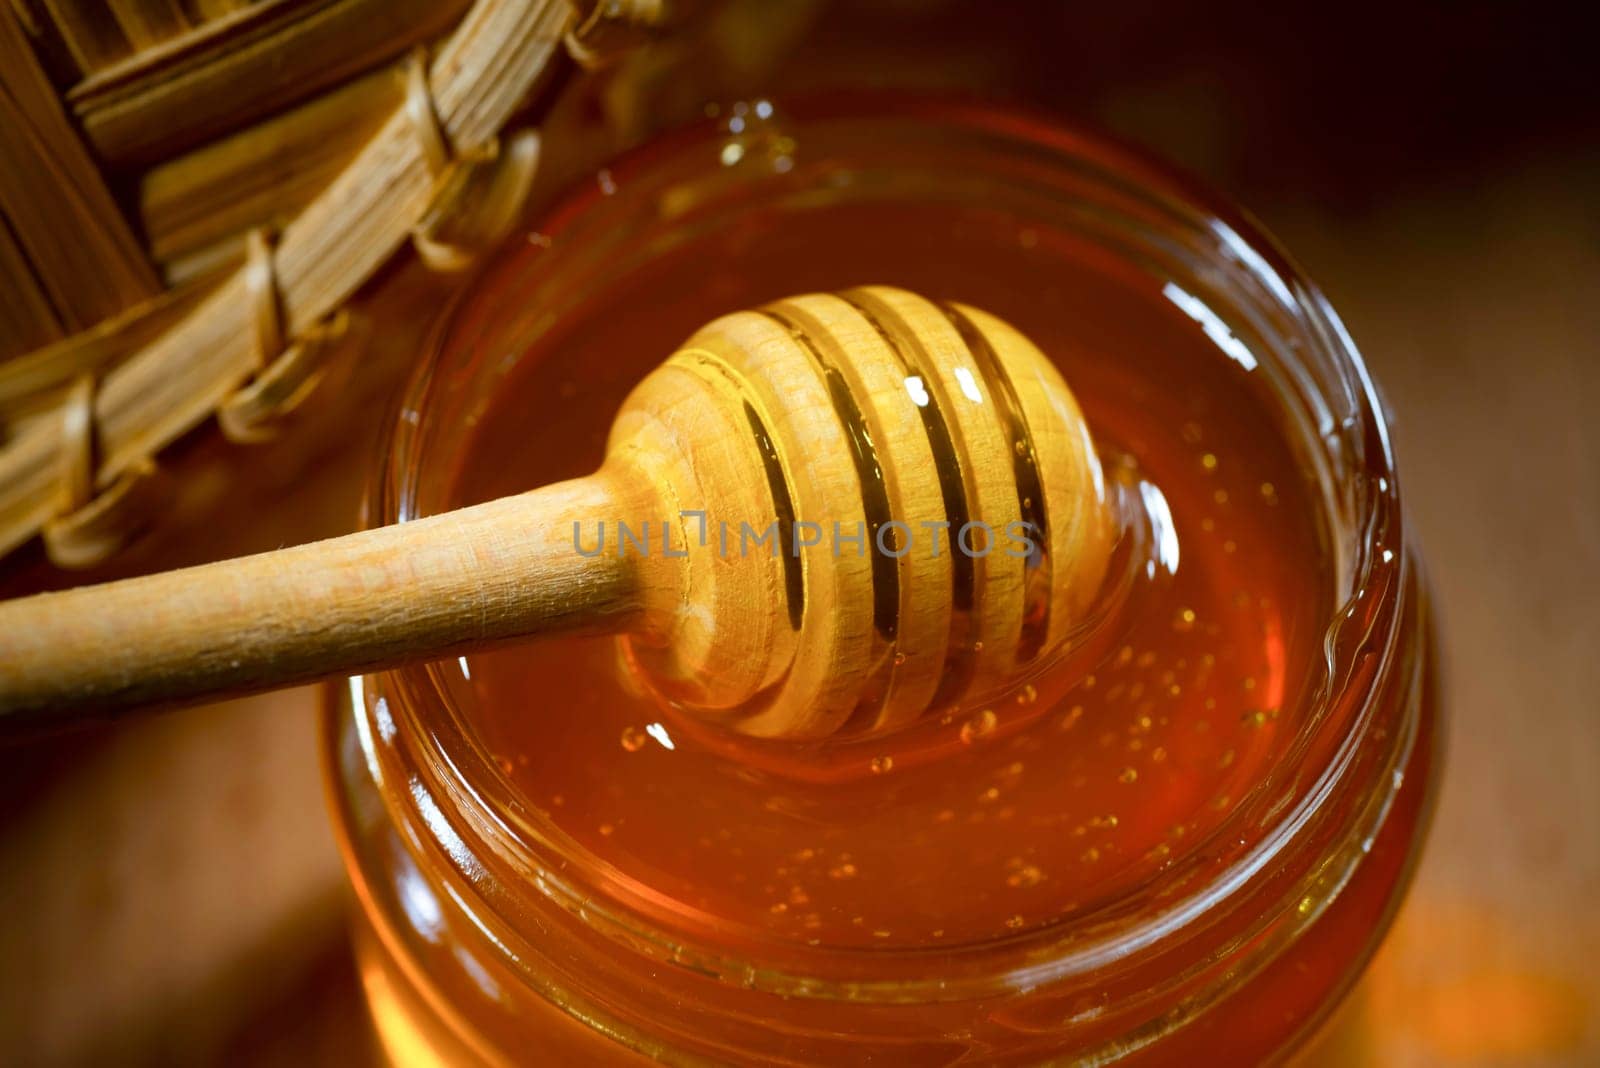 Liquid honey with a honey dipper in a glass jar on a wooden table. Healthy organic honey. Close-up, side view by Shablovskyistock